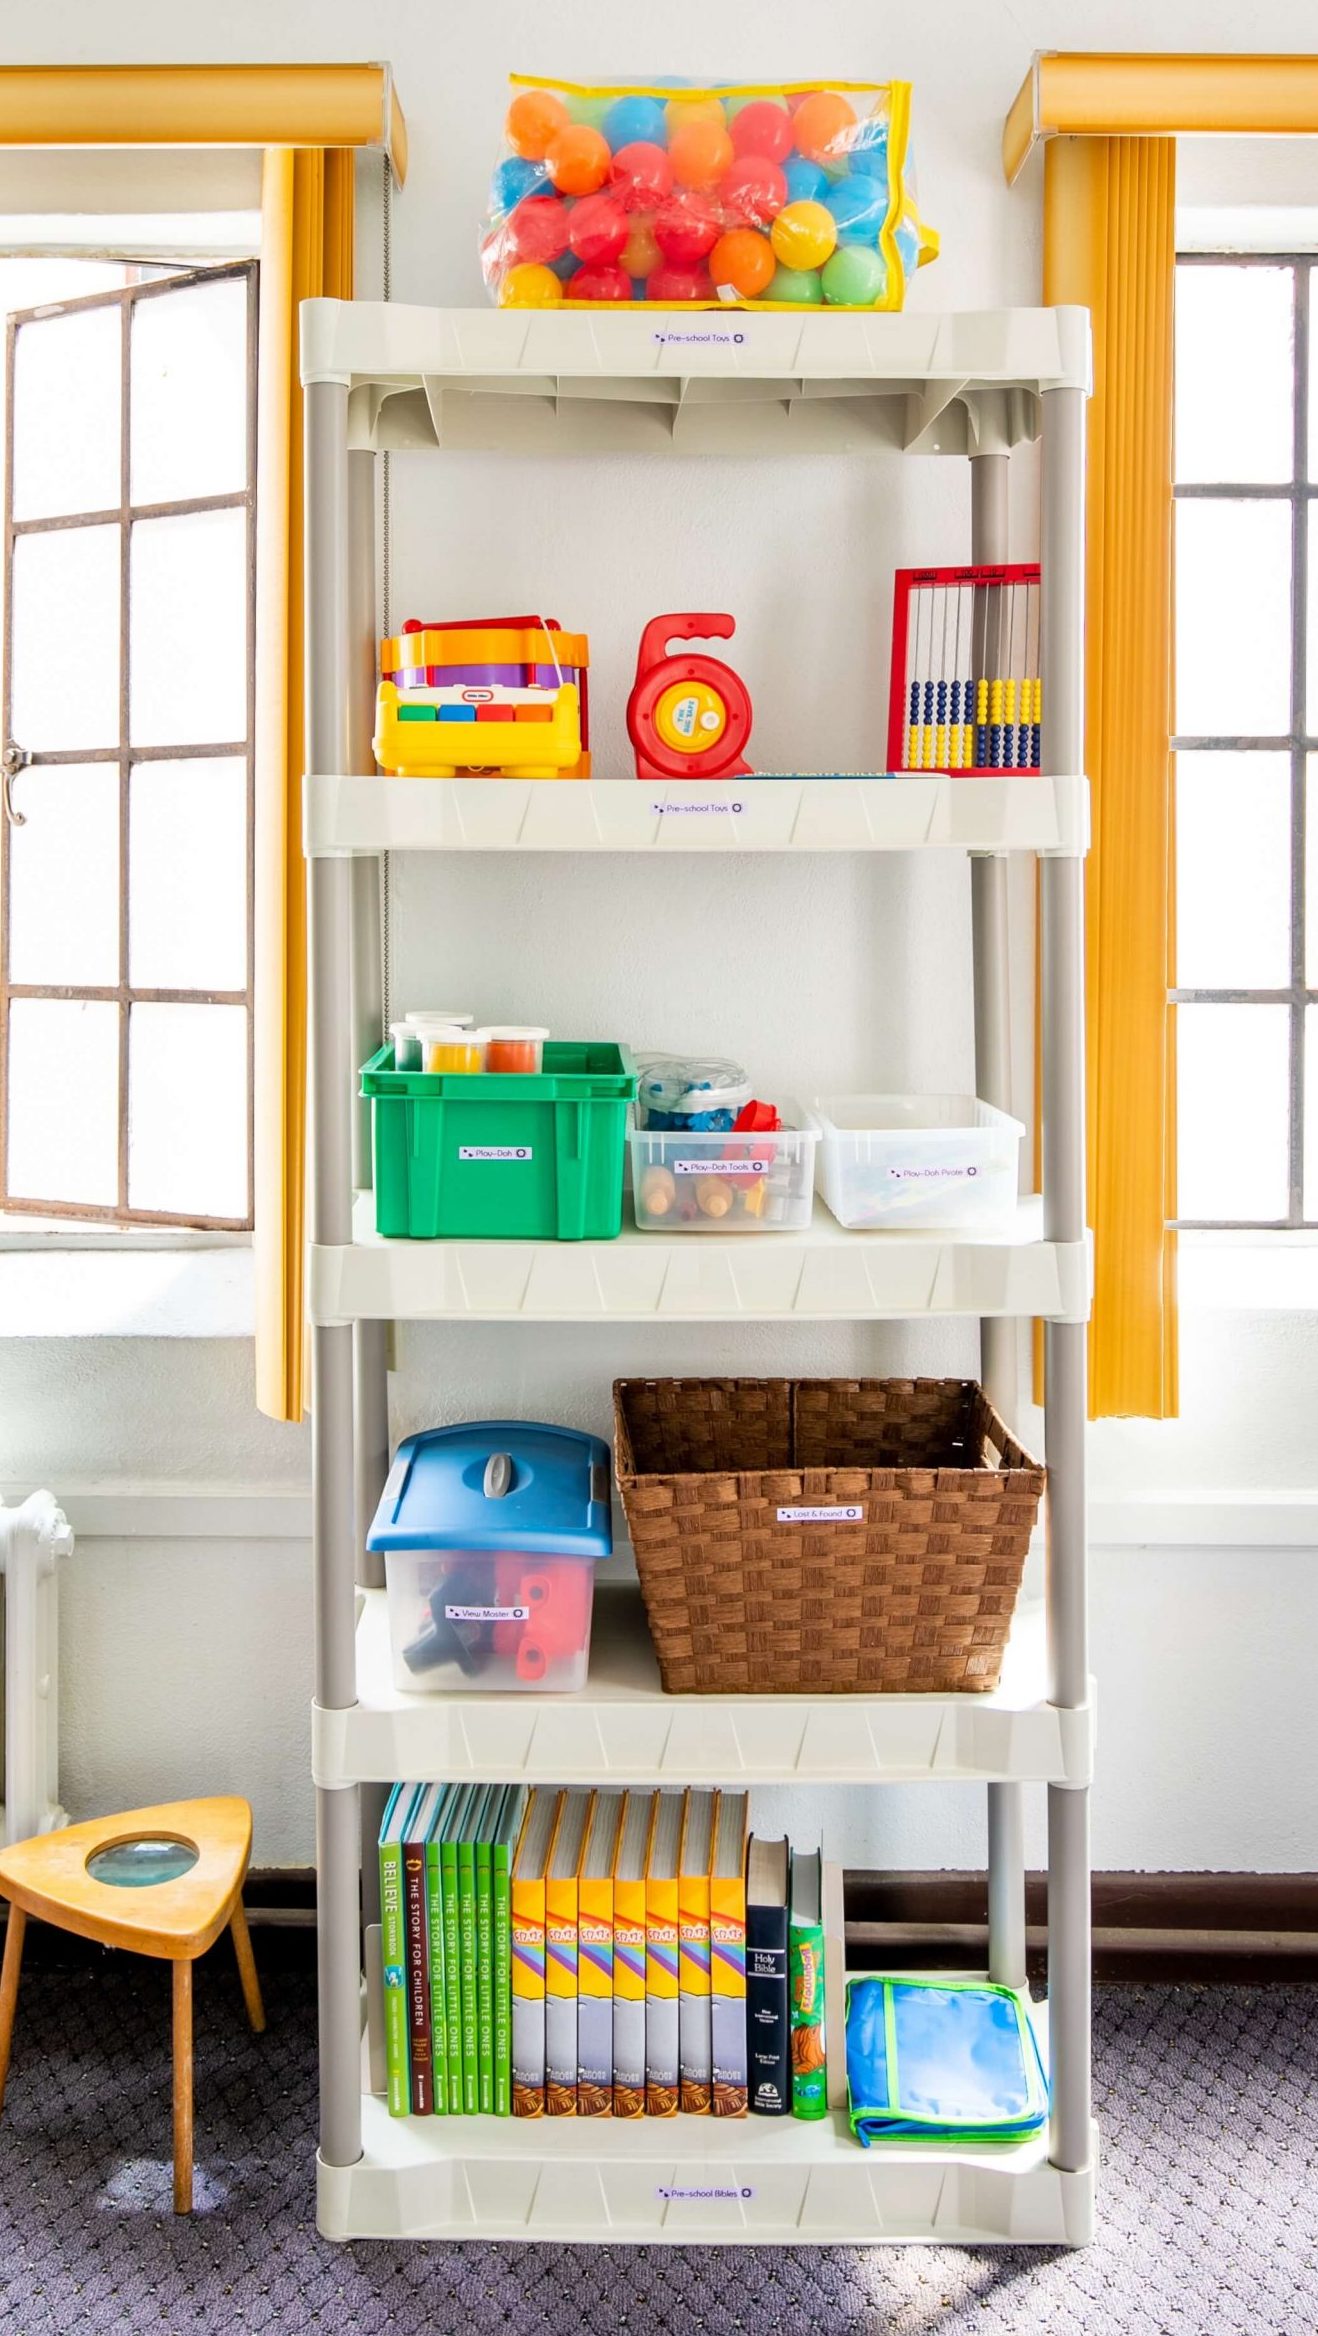 Melinda Grace Organizing of kids toys and supplies with baskets bins and labels on shelving